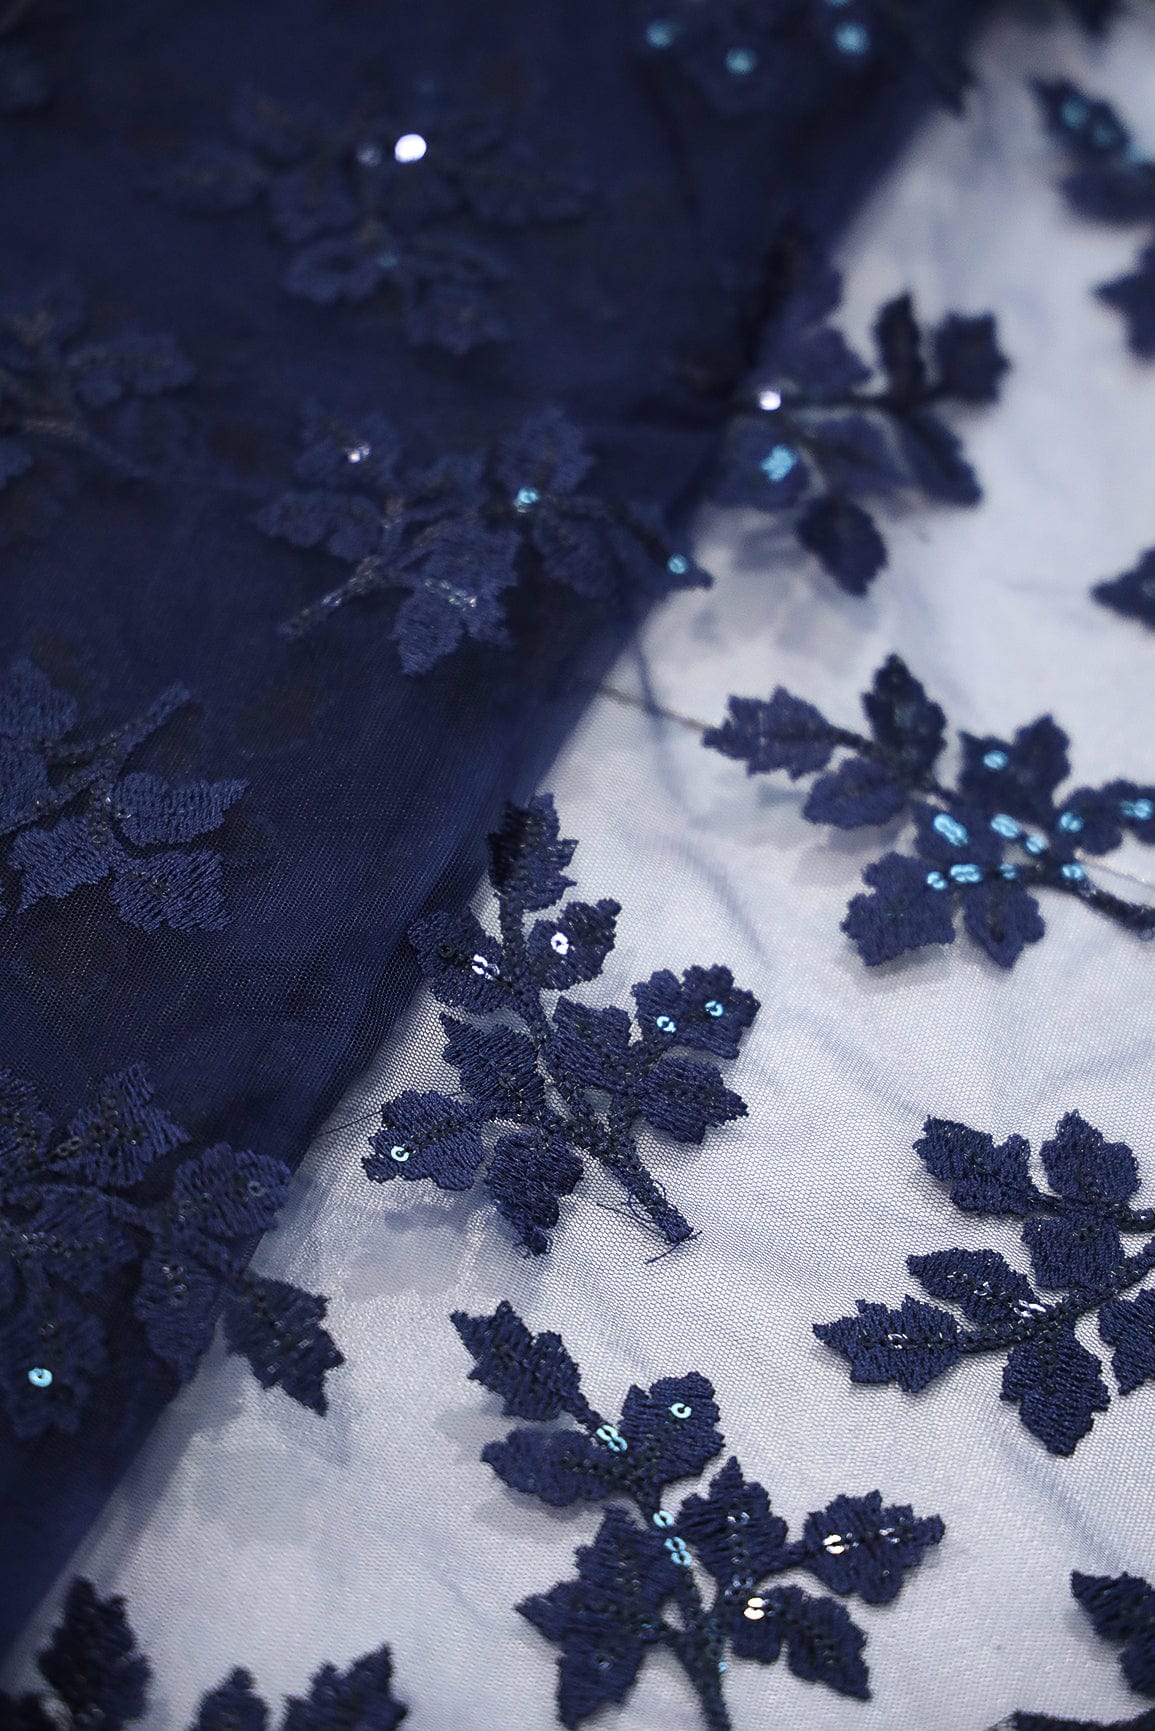 doeraa Embroidery Fabrics Navy Blue Thread With Sequins Leafy Embroidery Work On Navy Blue Soft Net Fabric